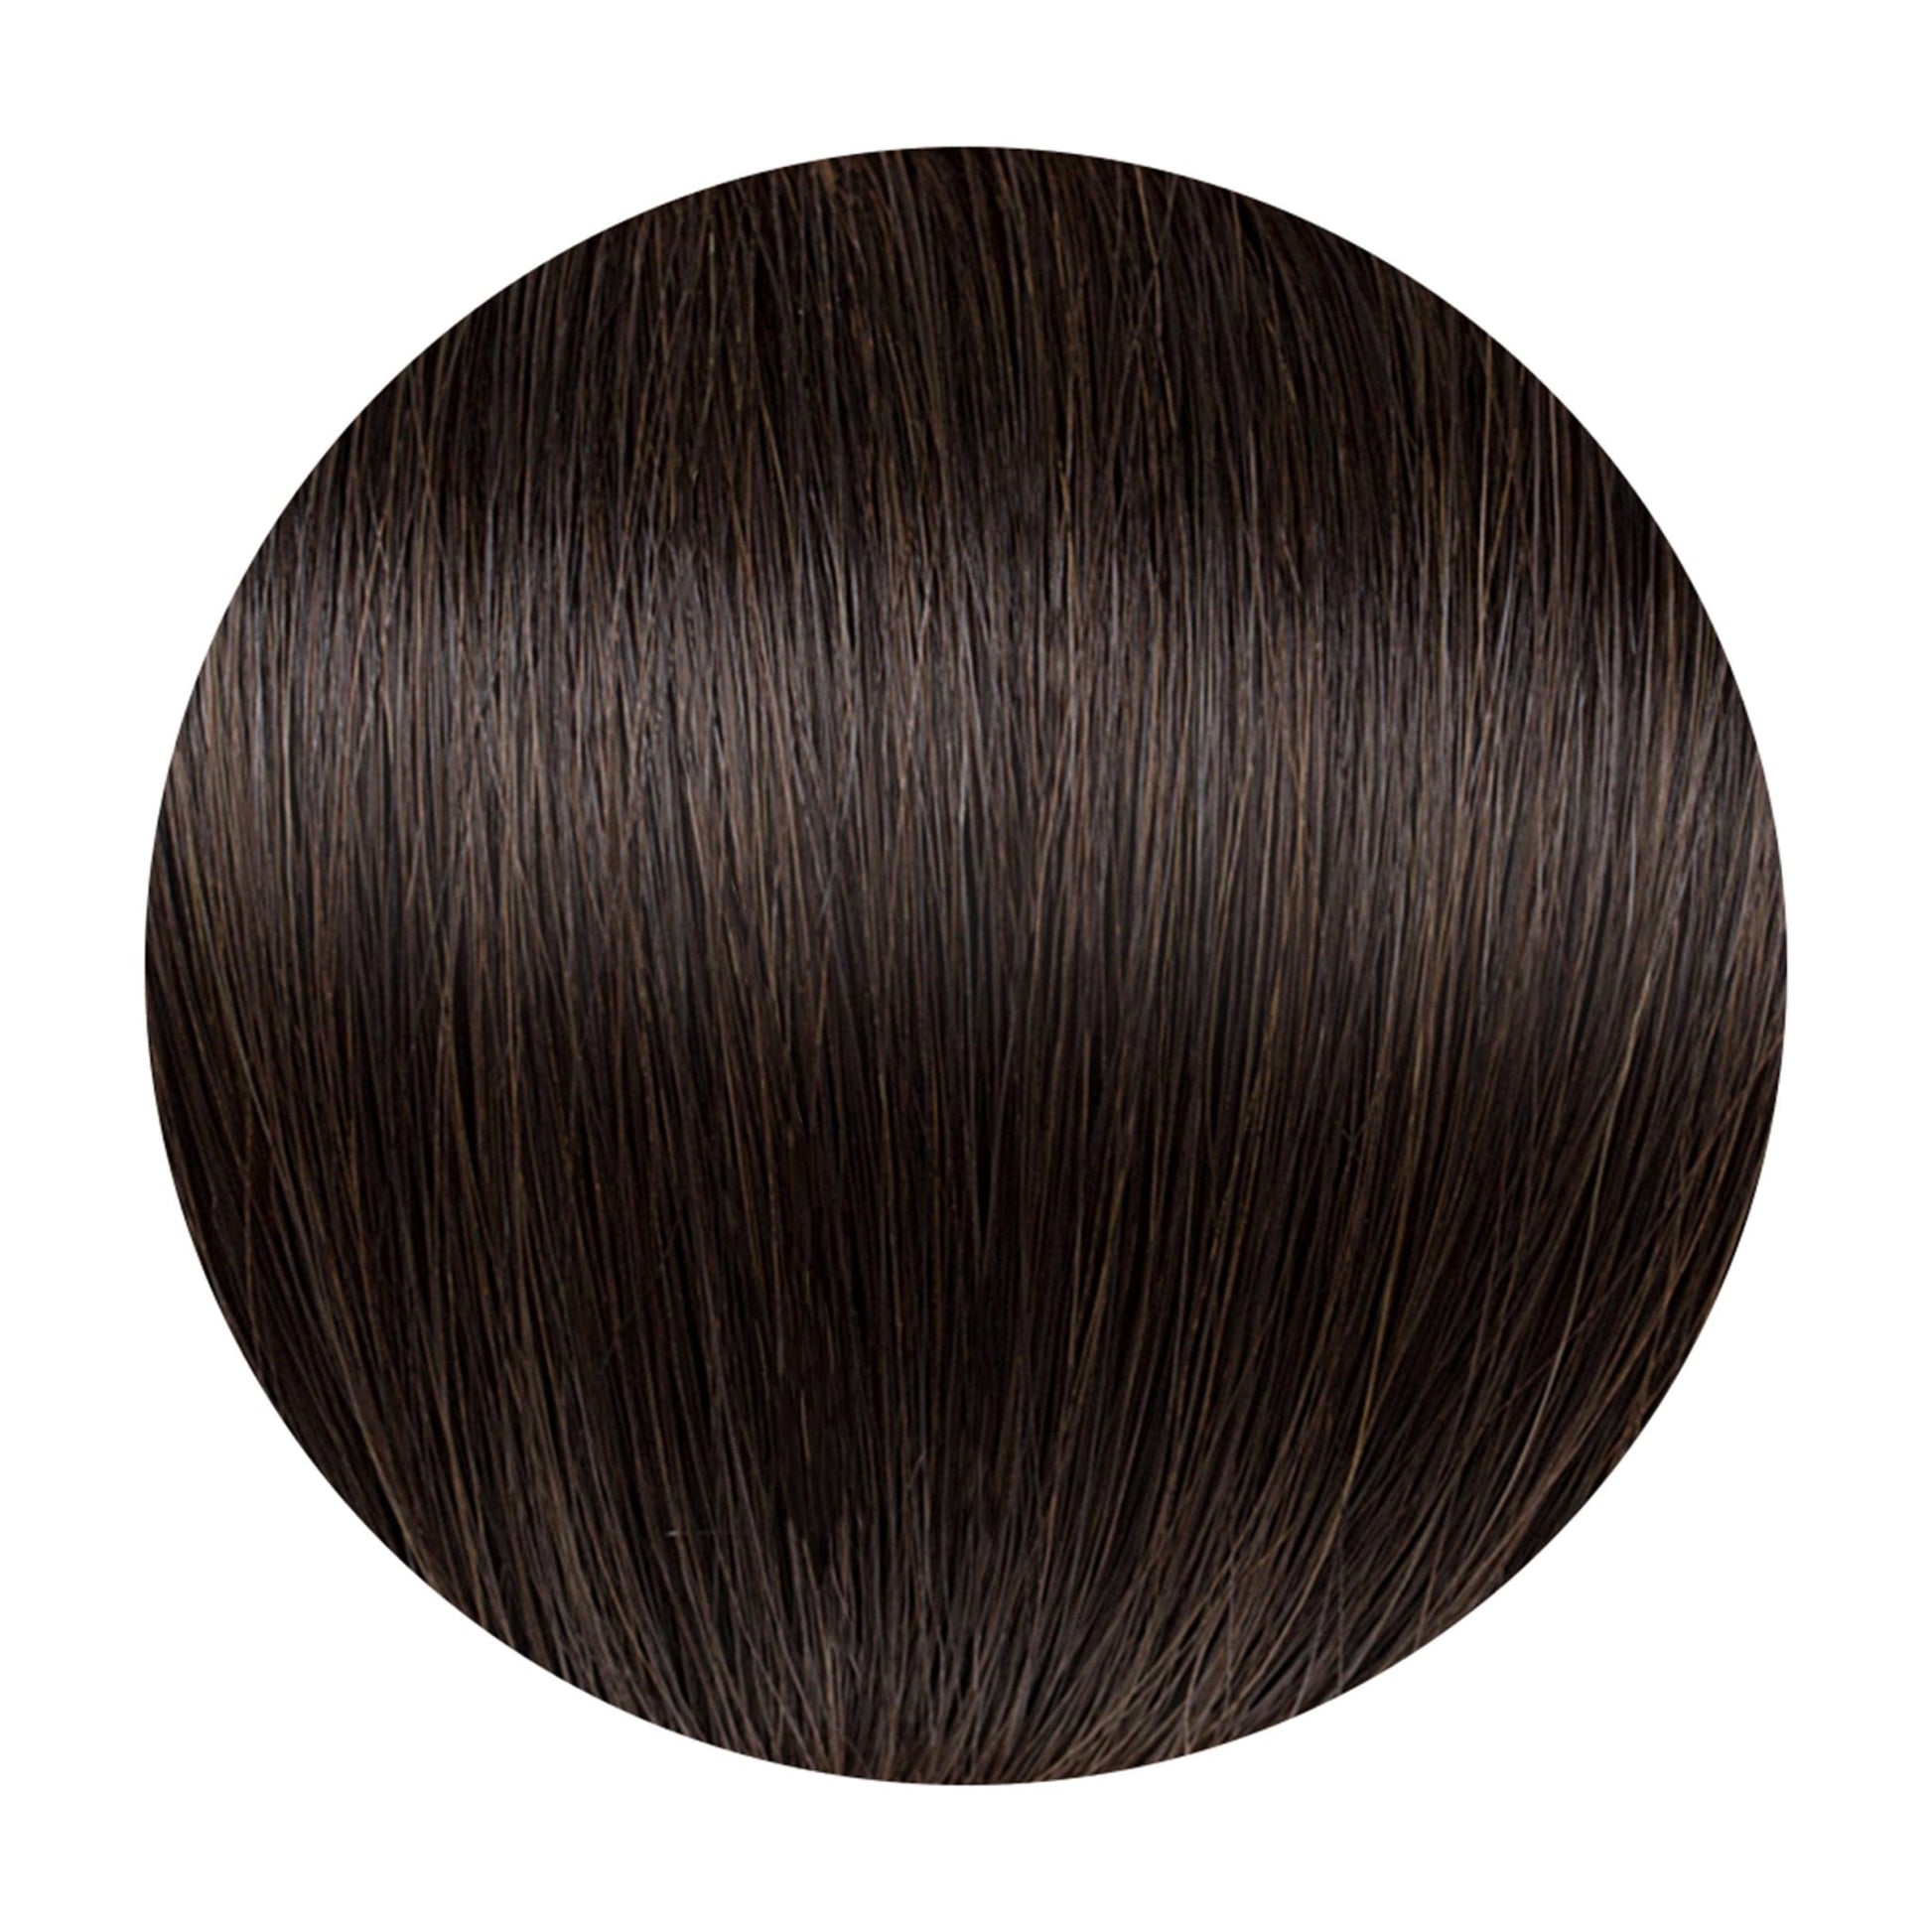 Seamless1 Ritzy Human Hair in 1 Piece - shelley and co